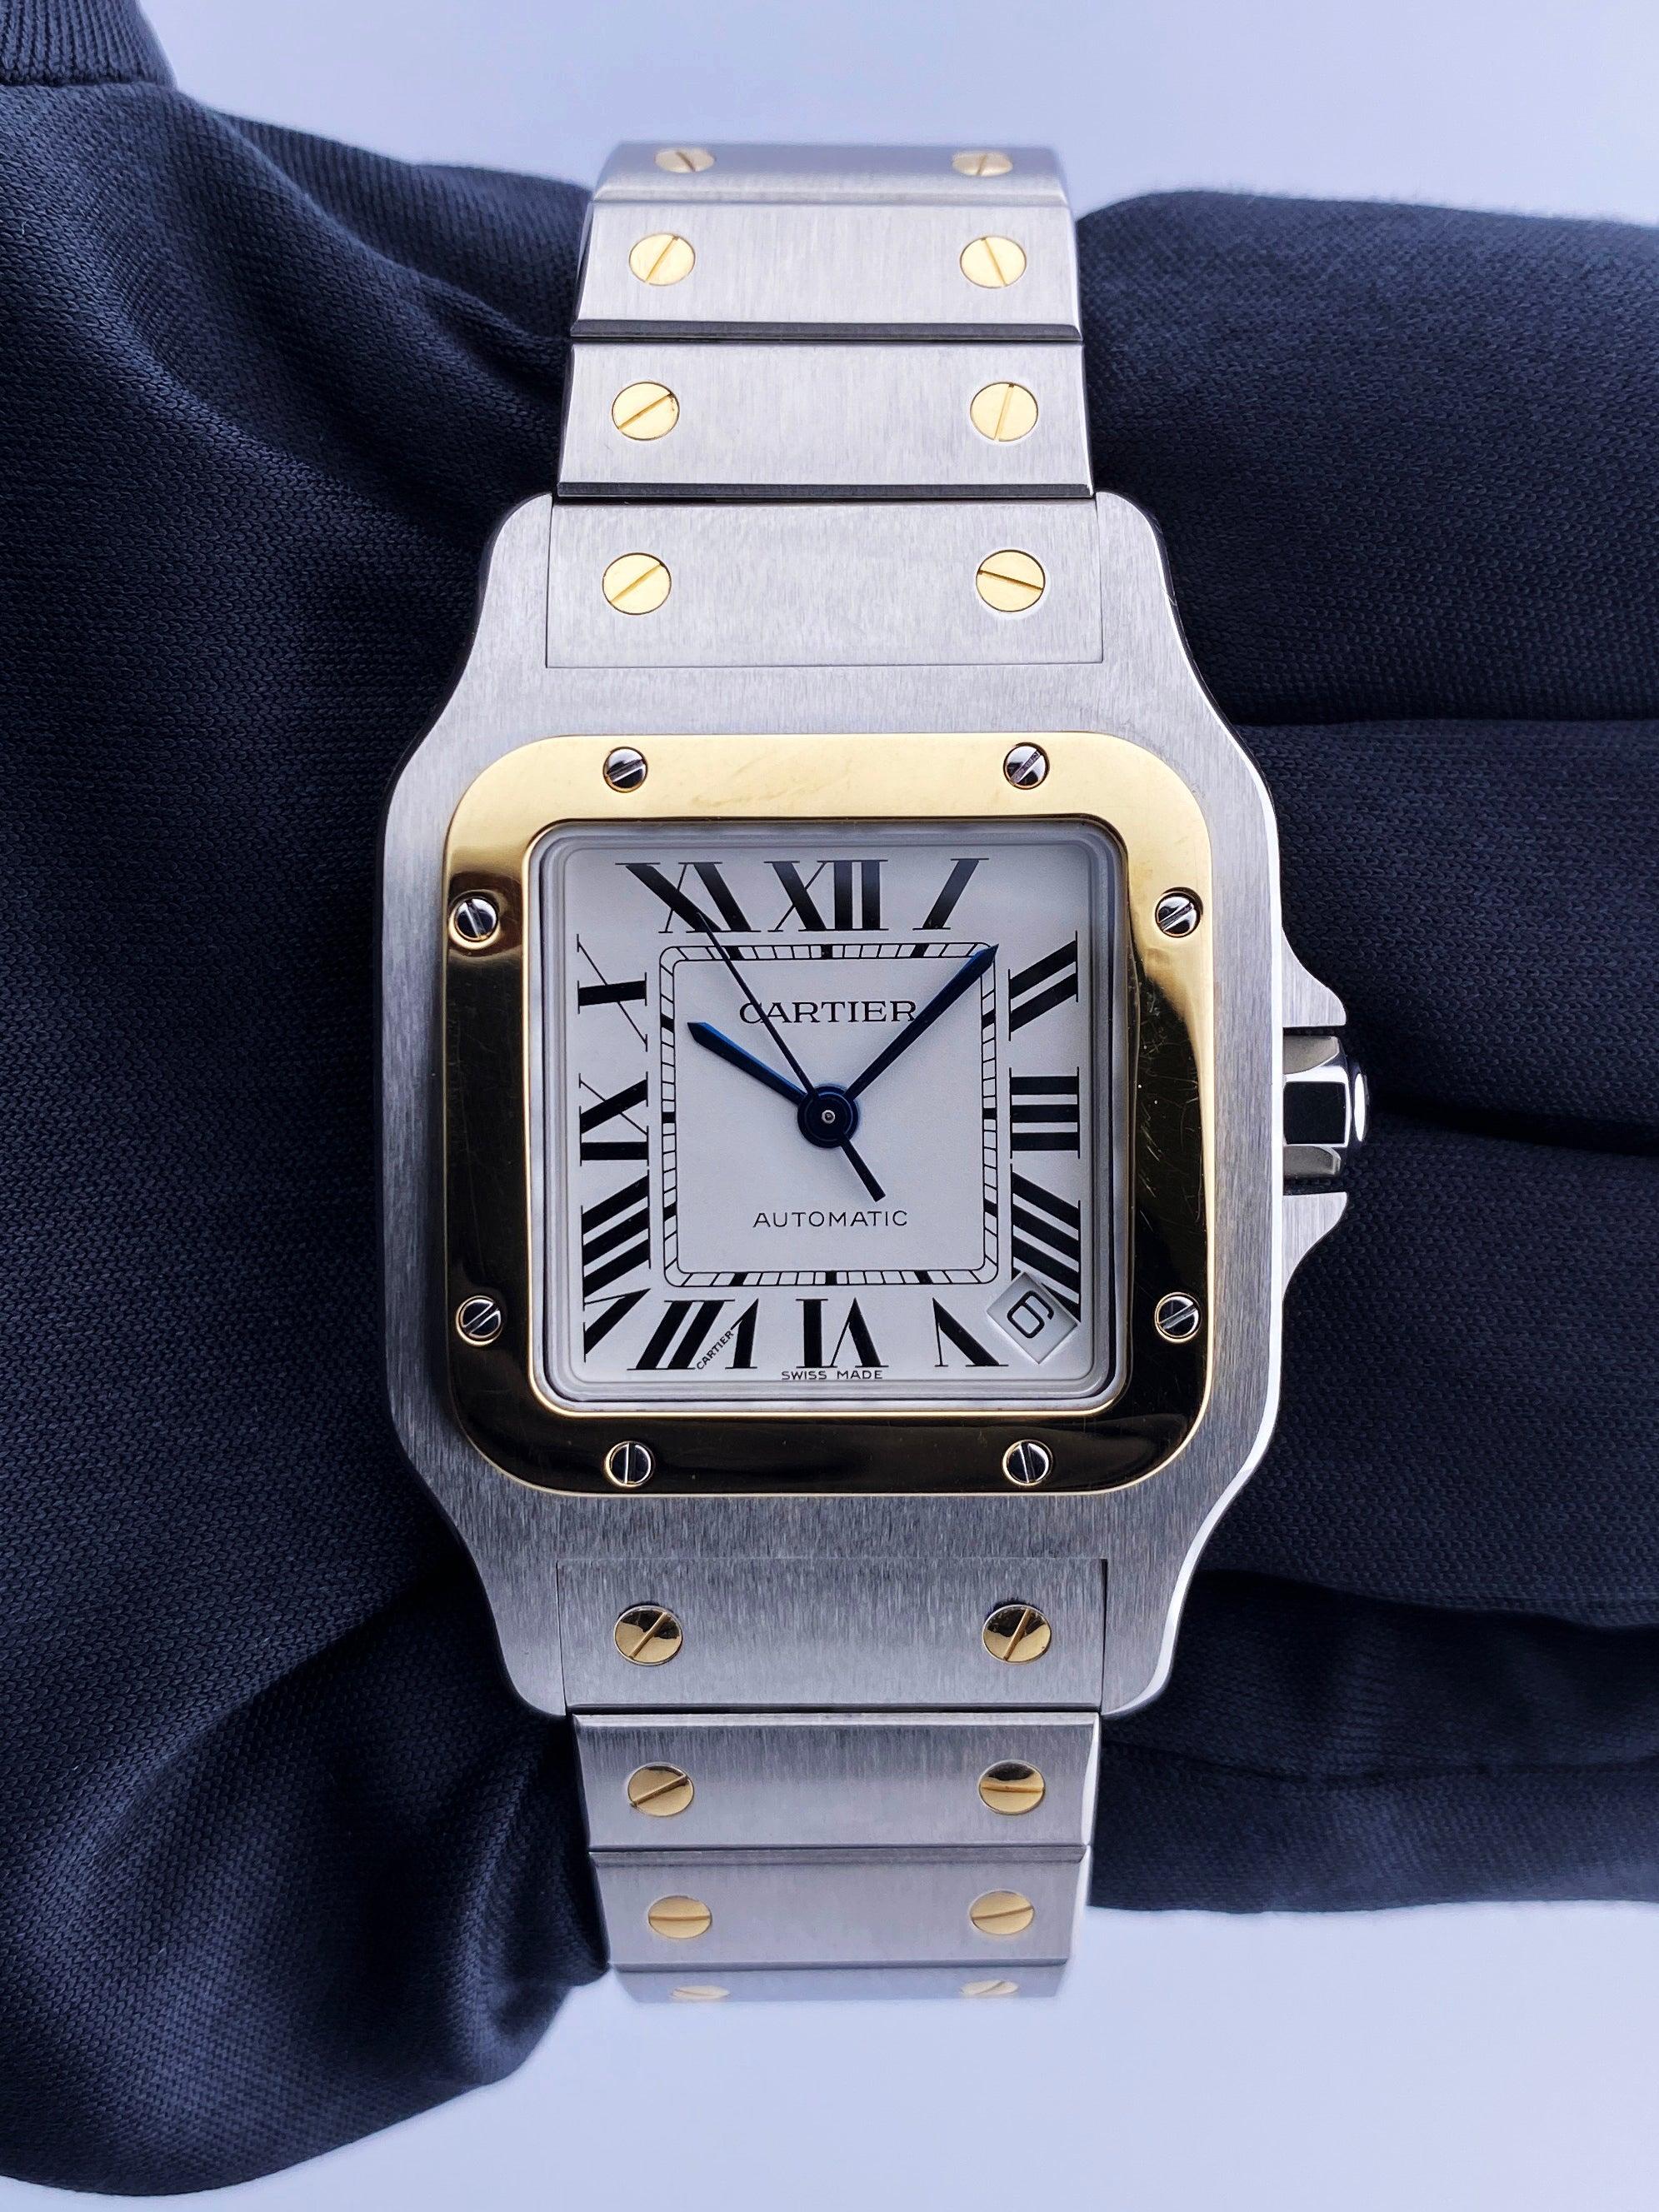 Cartier Santos 2823 Mens Watch. 32mm stainless steel case. 18K yellow gold bezel. White dial with blue steel hands Black Roman numeral hour markers. Minute markers around an inner dial. Date display between 4 and 5 o'clock position. 18K yellow gold